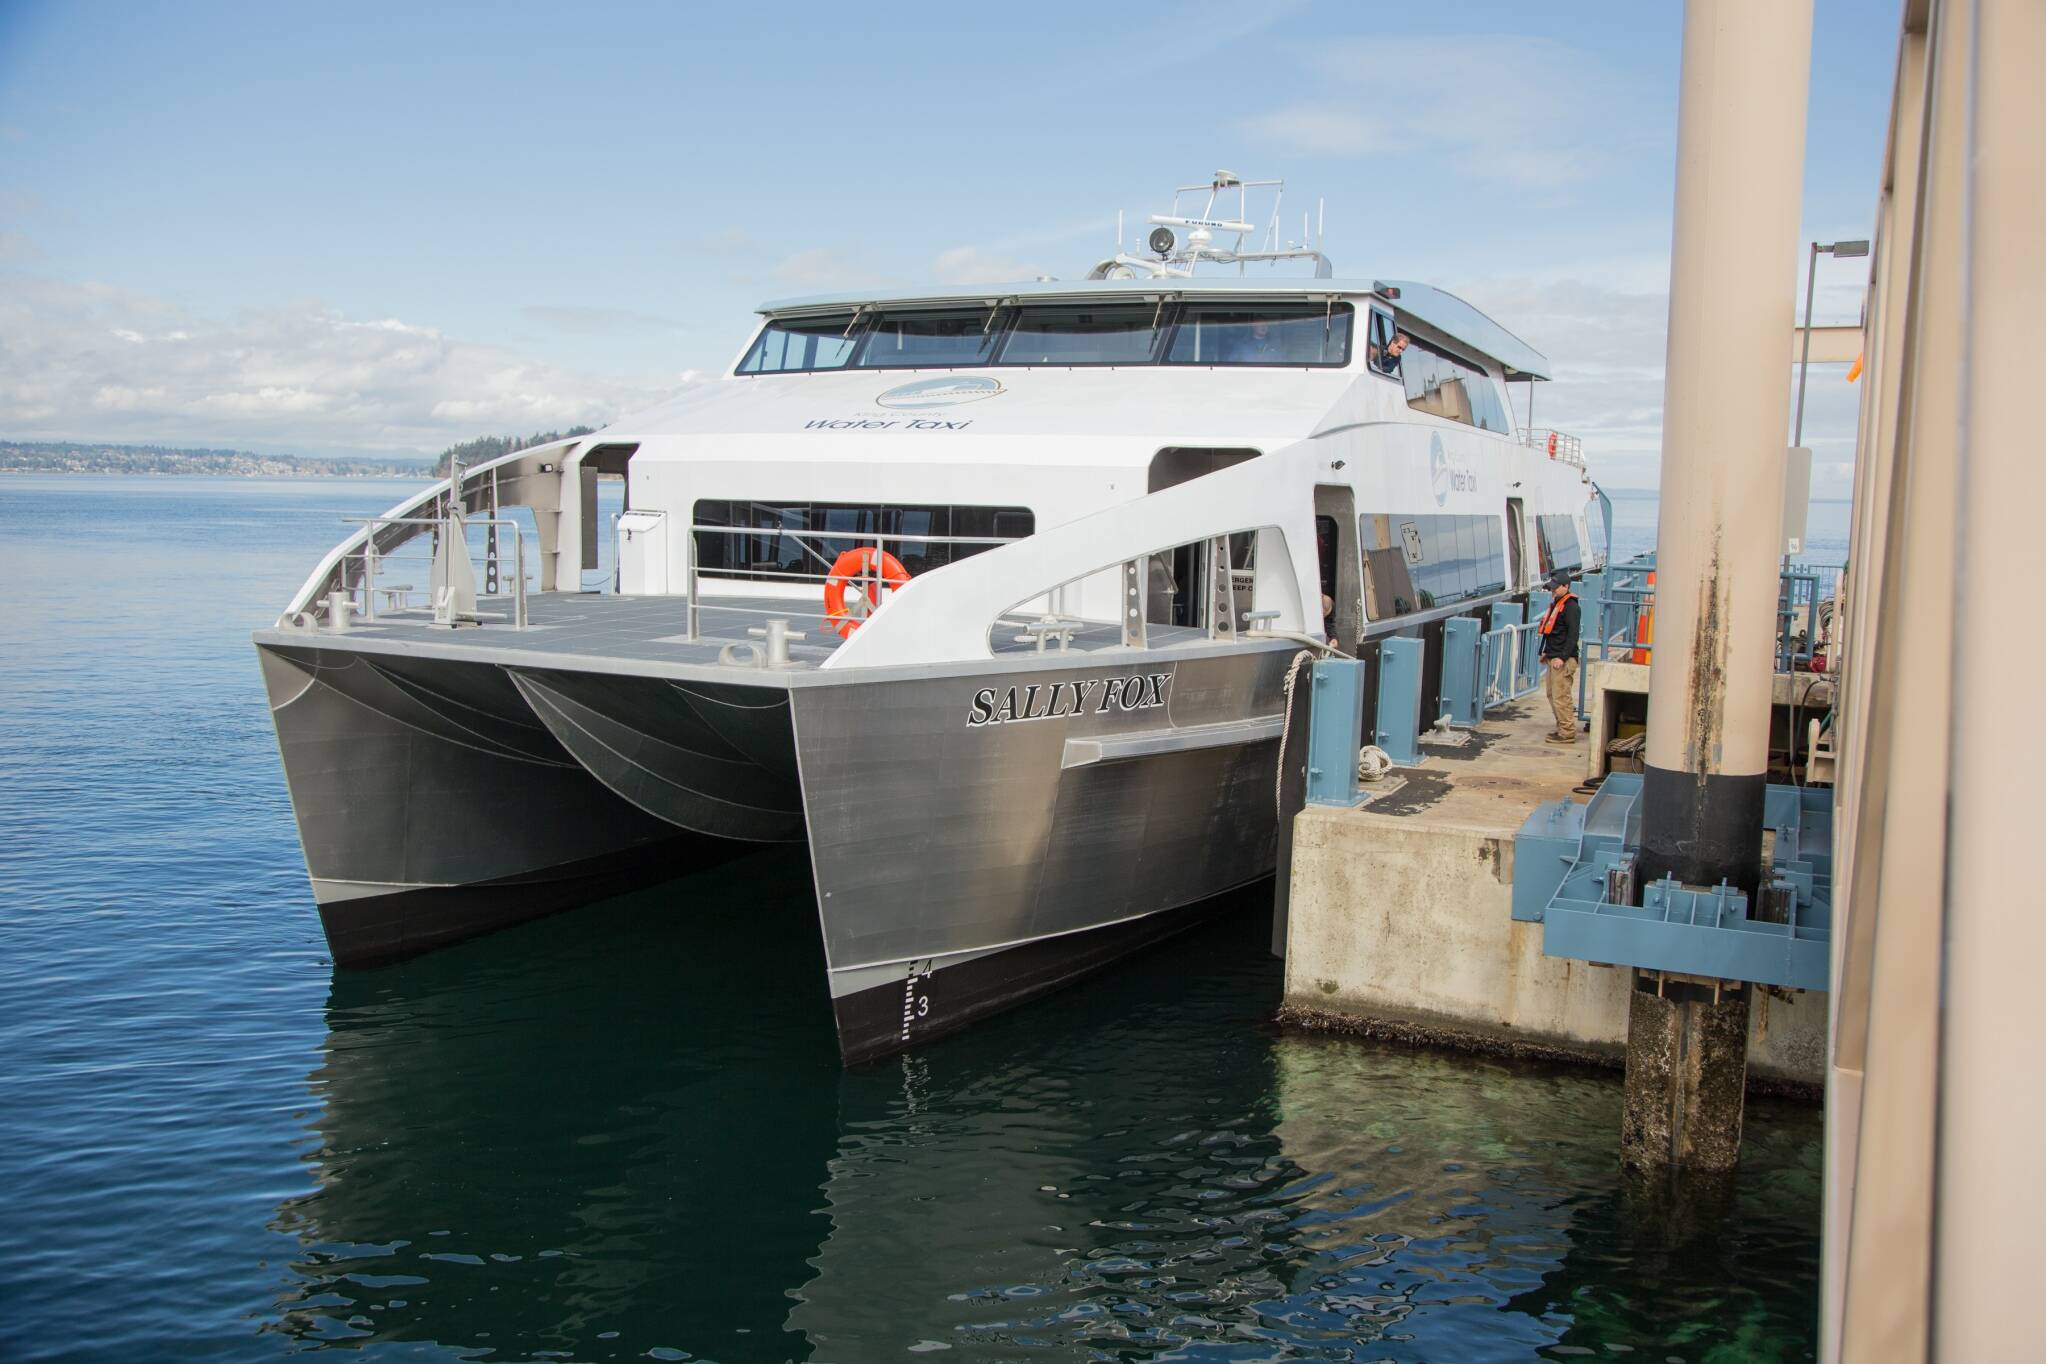 King County Metro Photo The MV Sally Fox passenger ferry, named after an island activist, serves travelers from north Vashon to downtown Seattle and back; she began operating the route in April 2015.